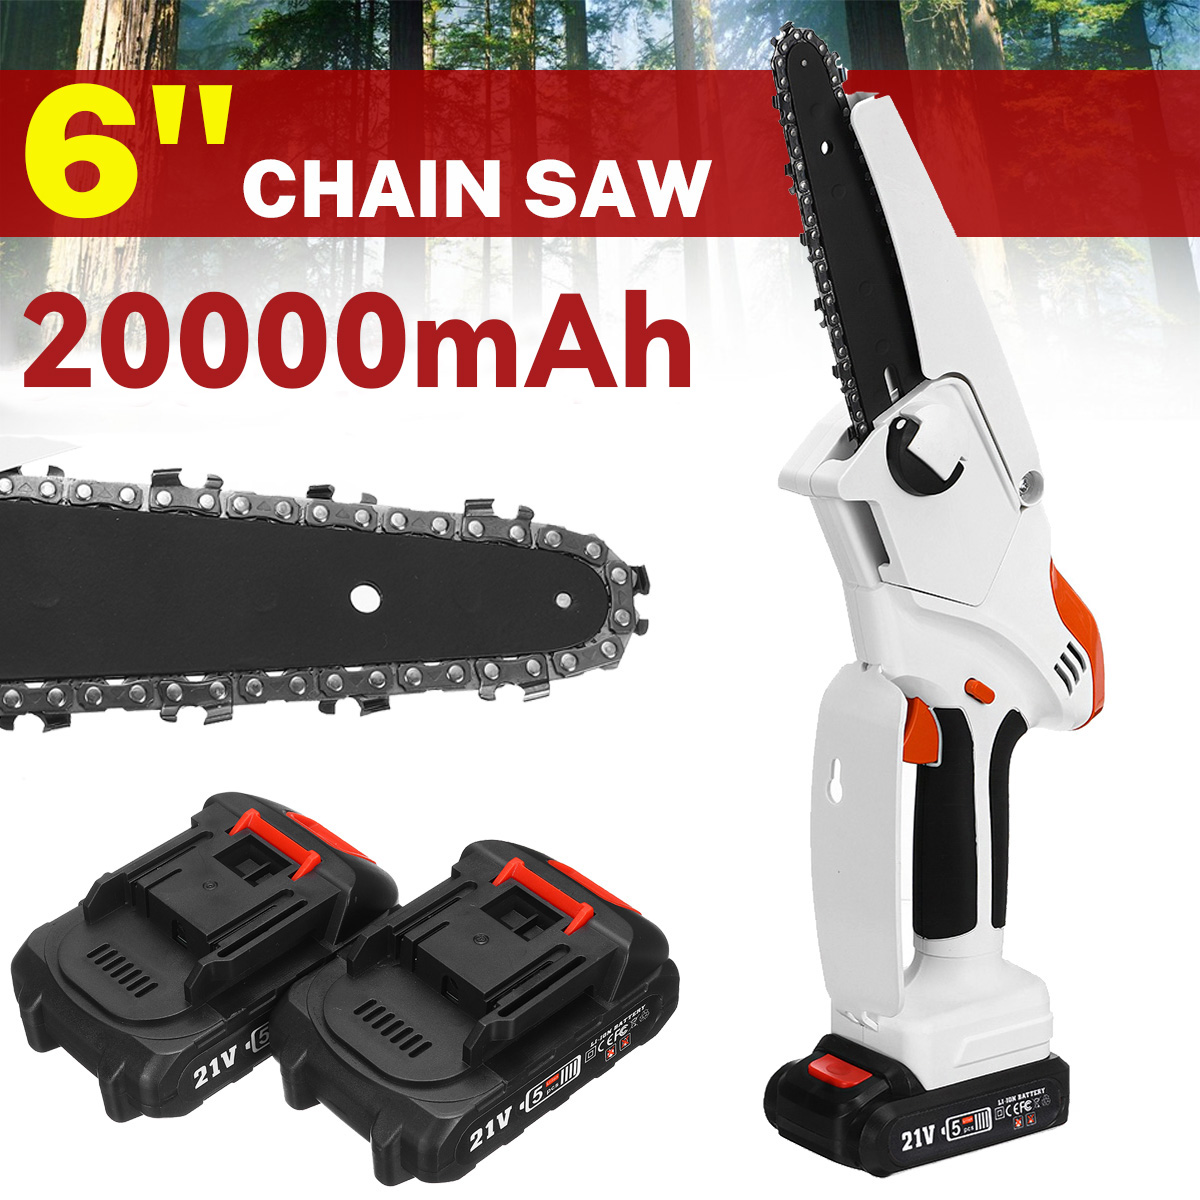 6-Inch-Portable-Electric-Chain-Saw-Mini-Cordless-Rechargeable-Woodworking-Wood-Cutting-Tool-W-12-Bat-1886164-1